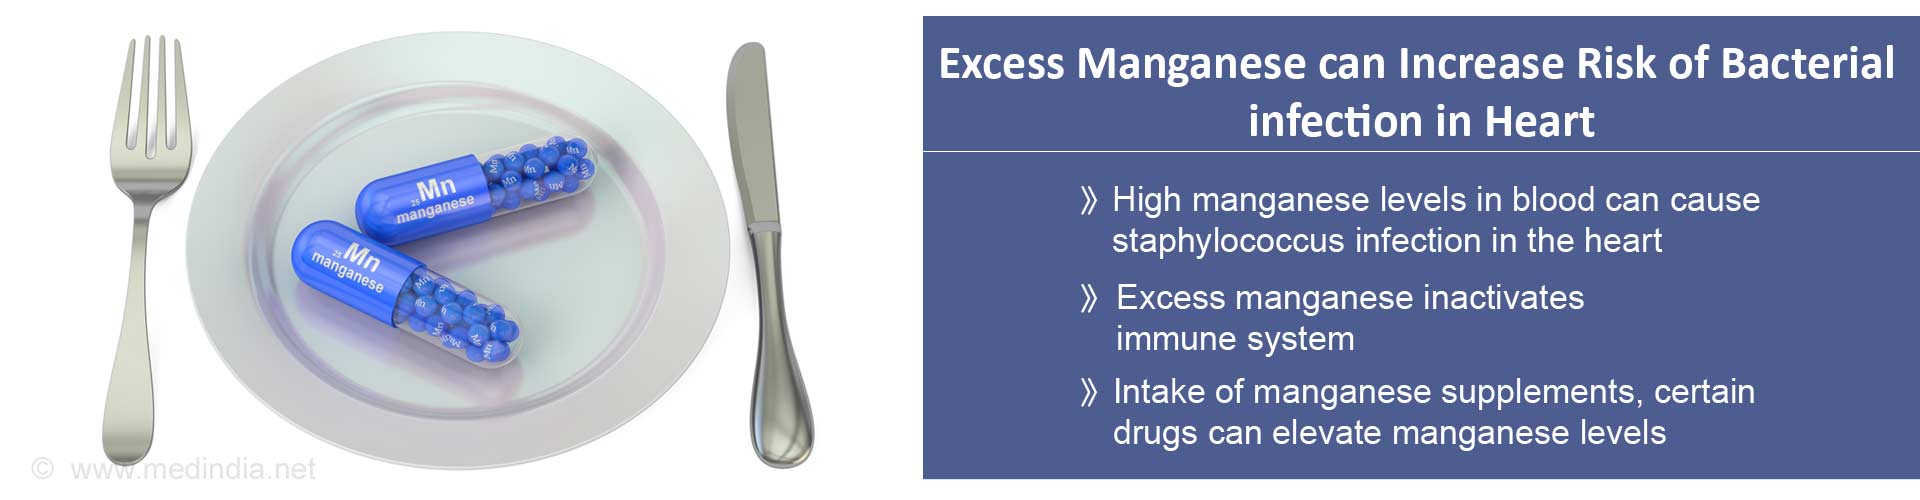 Excess manganese can increase risk of bacterial infection in heart
- High manganese levels in blood can cause Staphylococcus aureus infection in the heart
- Excess manganese inactivates immune system
- Intake of manganese supplements, certain drugs can elevate manganese levels